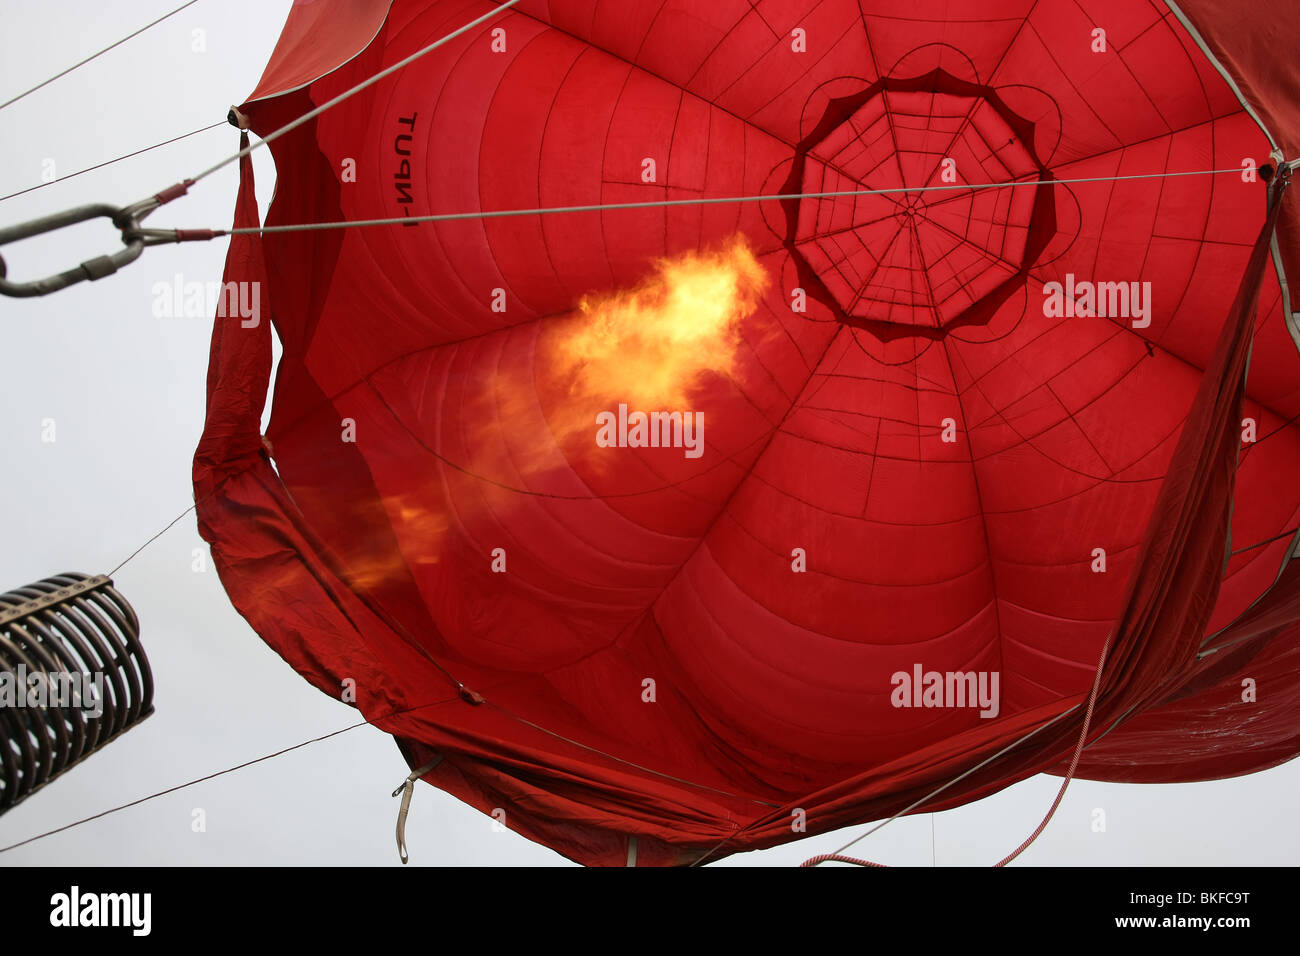 hot-air balloon, during inflation Stock Photo